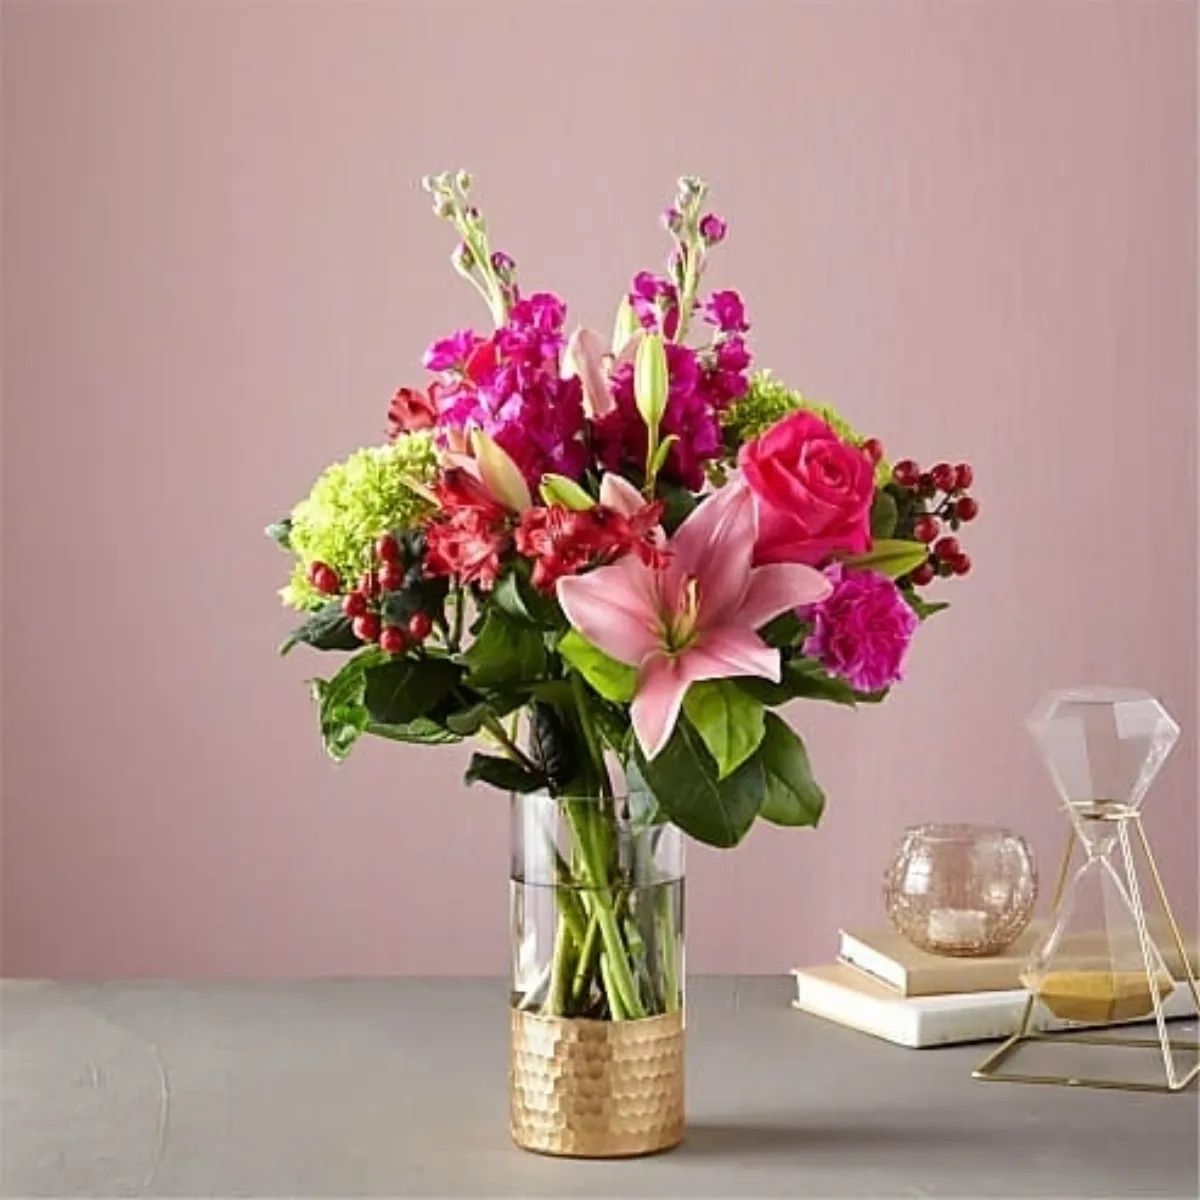 Assorted pink flowers in a tall glass vase